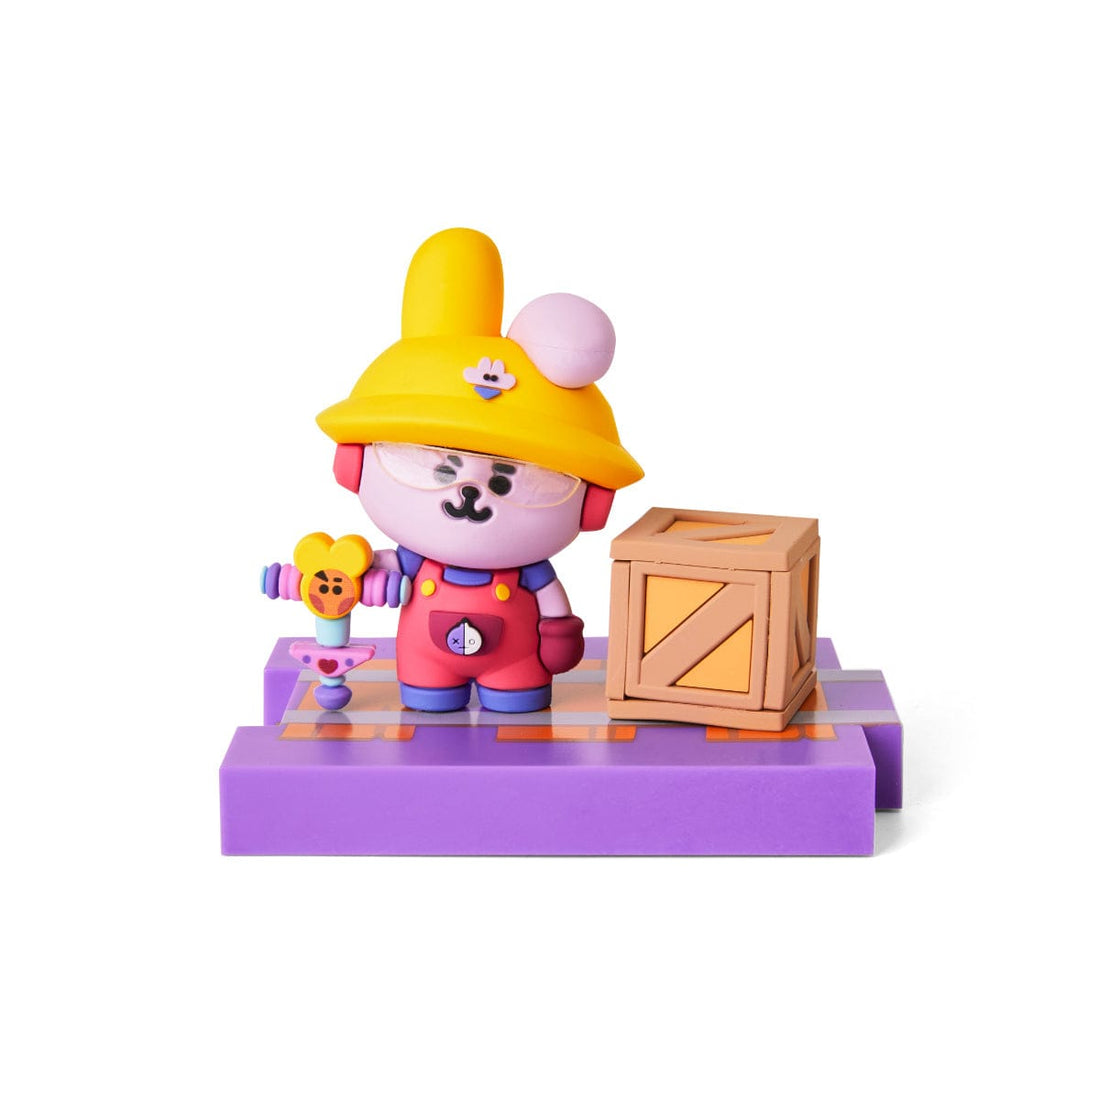 Brawl Stars X BT21 JACKY COOKY BUILDABLE FIGURINE – LINE FRIENDS COLLECTION  STORE